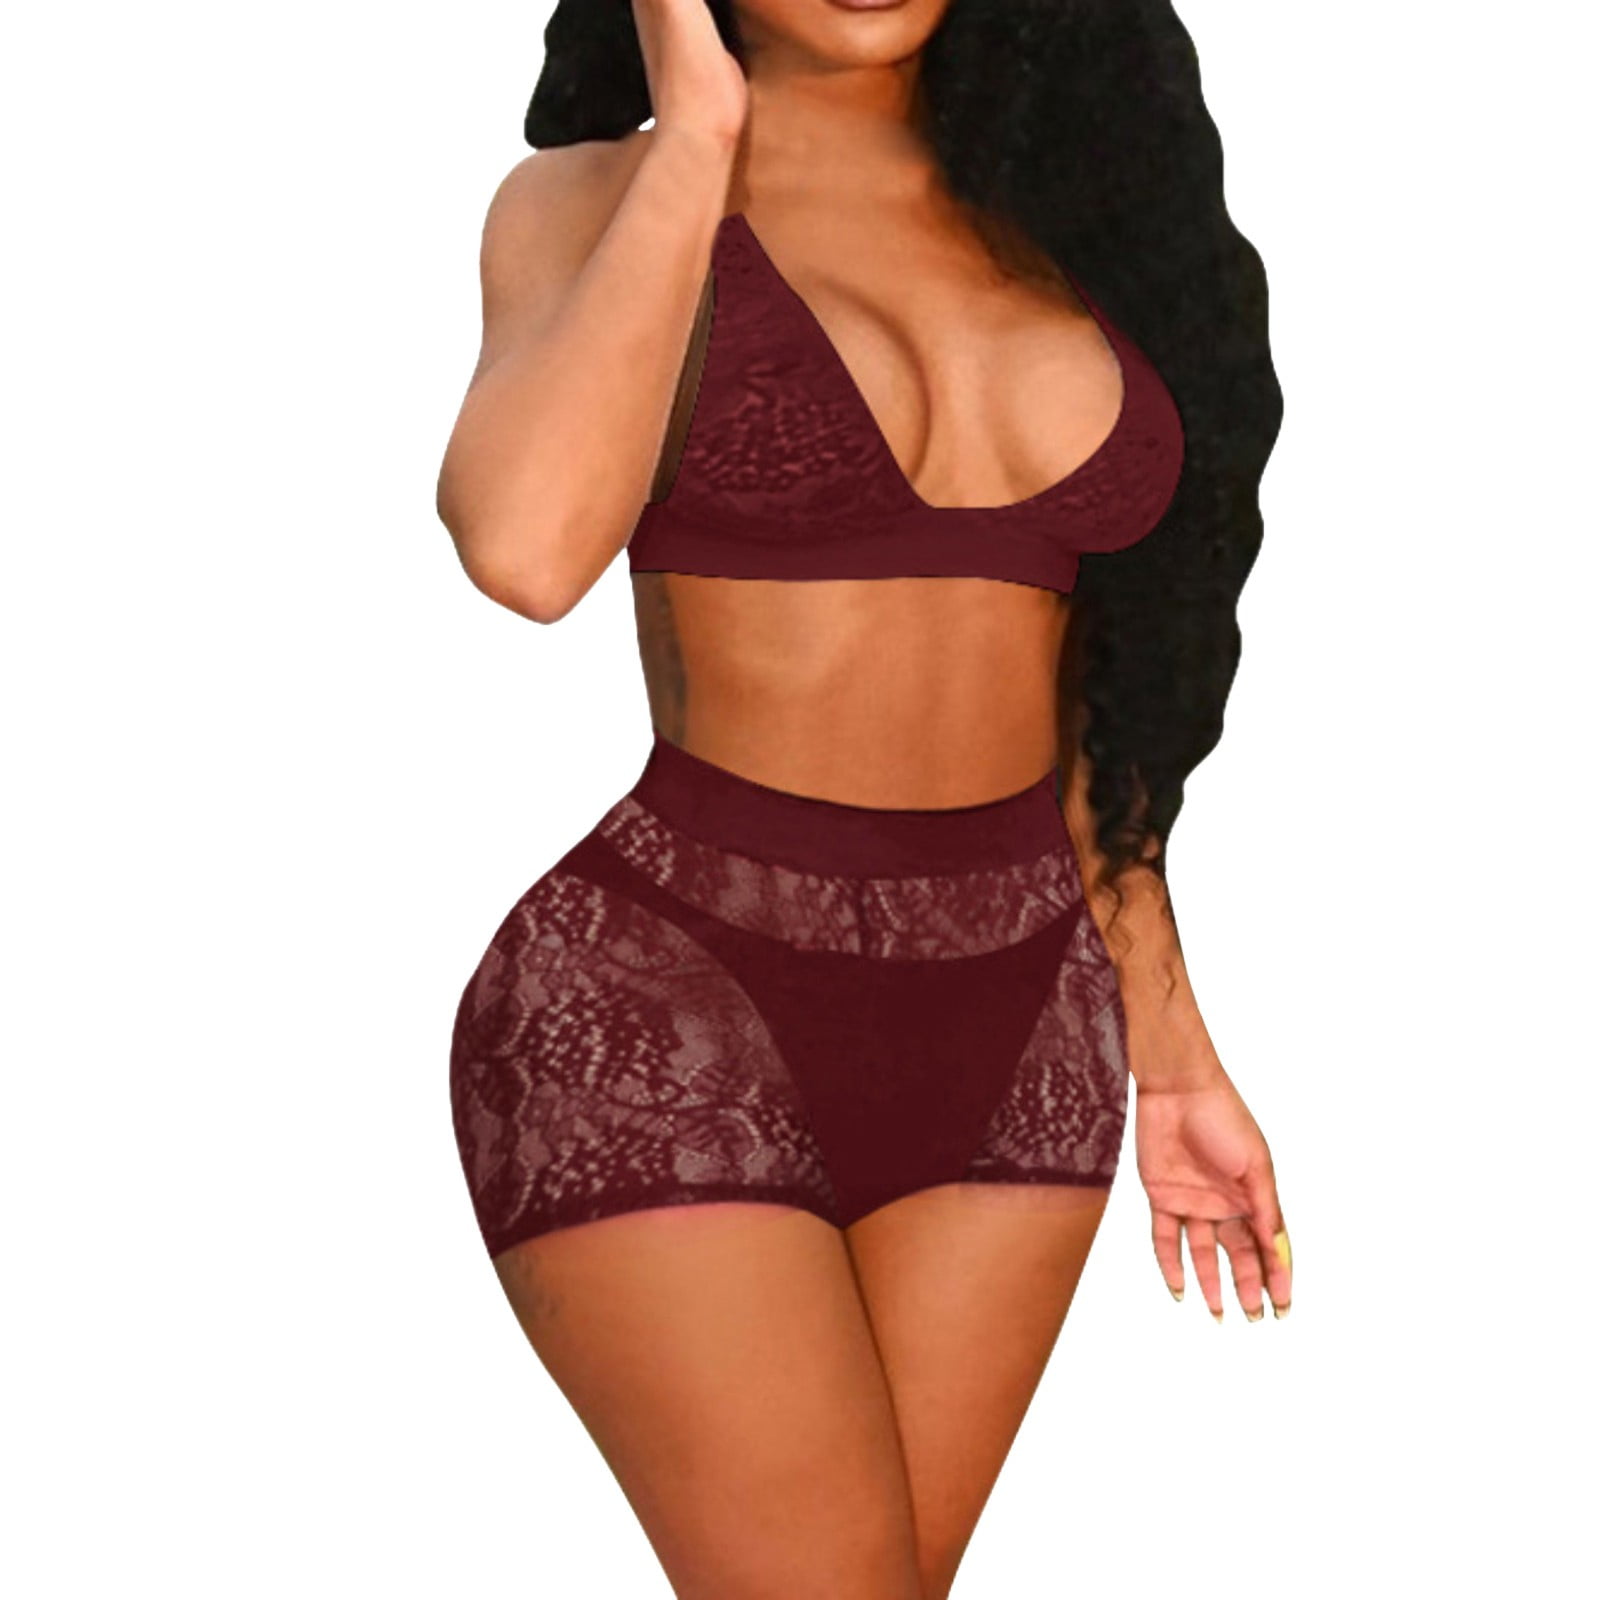 PMUYBHF Women Two Piece Outfits Sets Clubwear Two Piece Outfits Women  Wedding Ladies Plus Size Seamless Bodysuit Thong Pants Corset Jumpsuit  Track